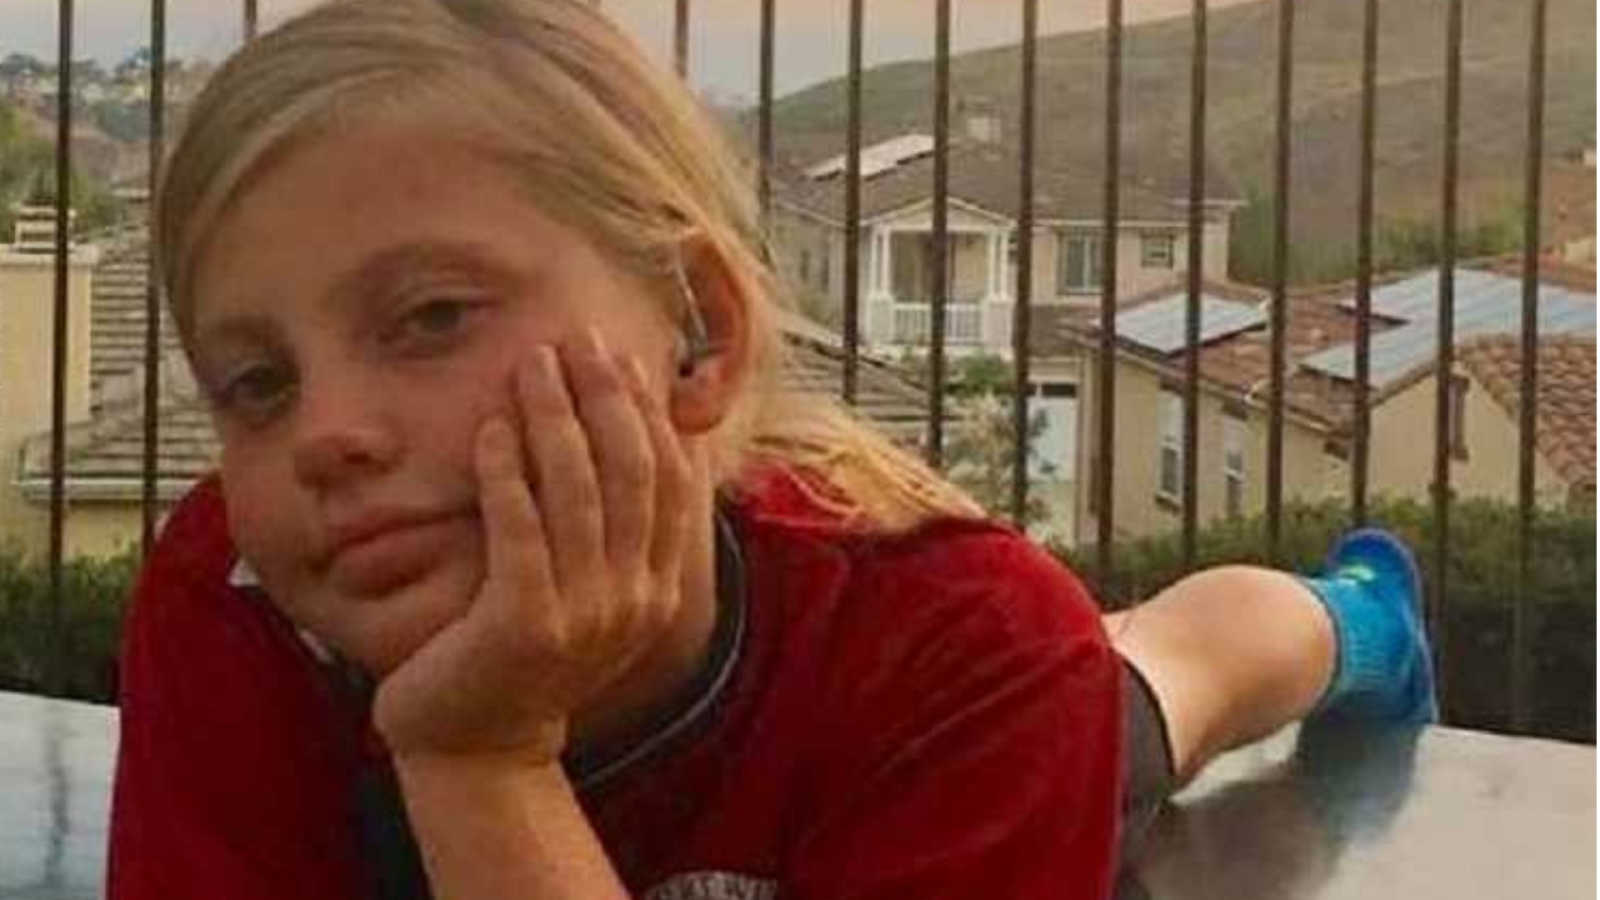 Mom takes photo of tomboy daughter lying the floor of a balcony